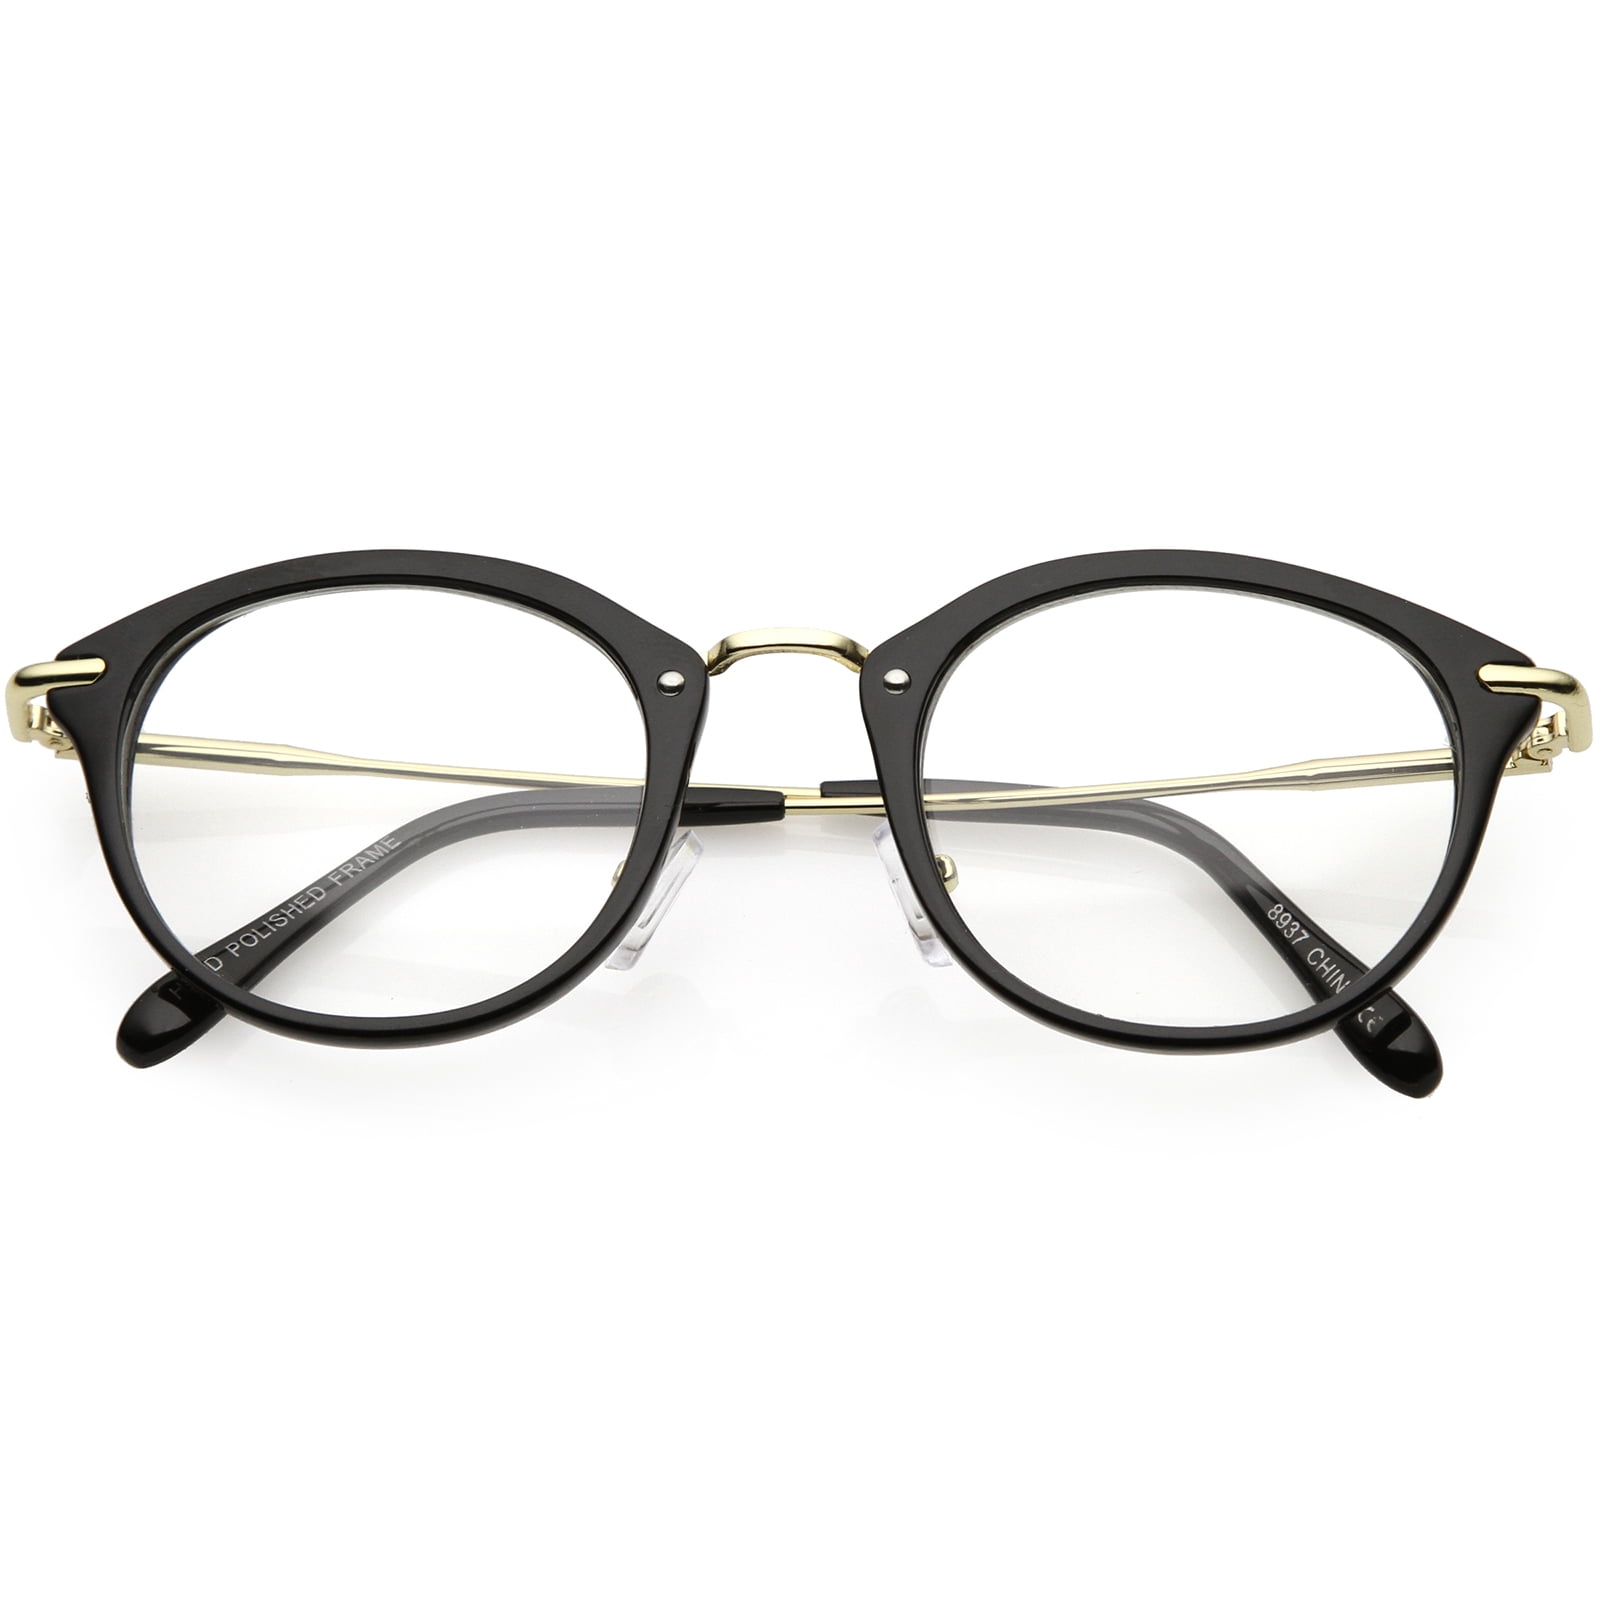 Sunglass La Classic Horn Rimmed Round Eyeglasses Thin Metal Arms